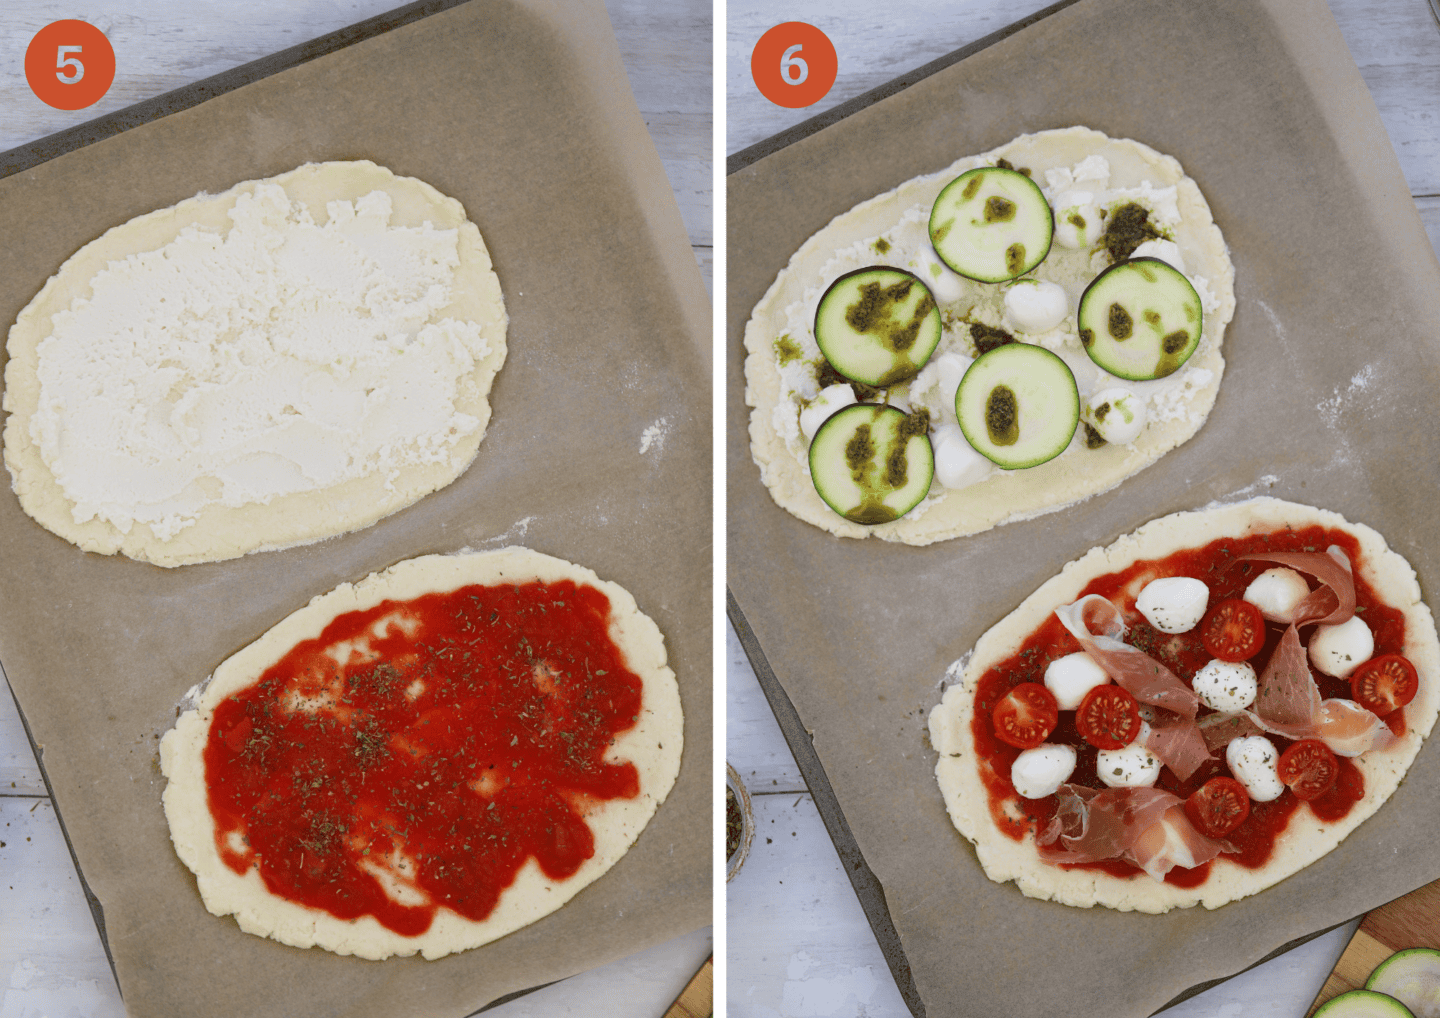 Adding toppings to the gluten free flatbread pizzas.